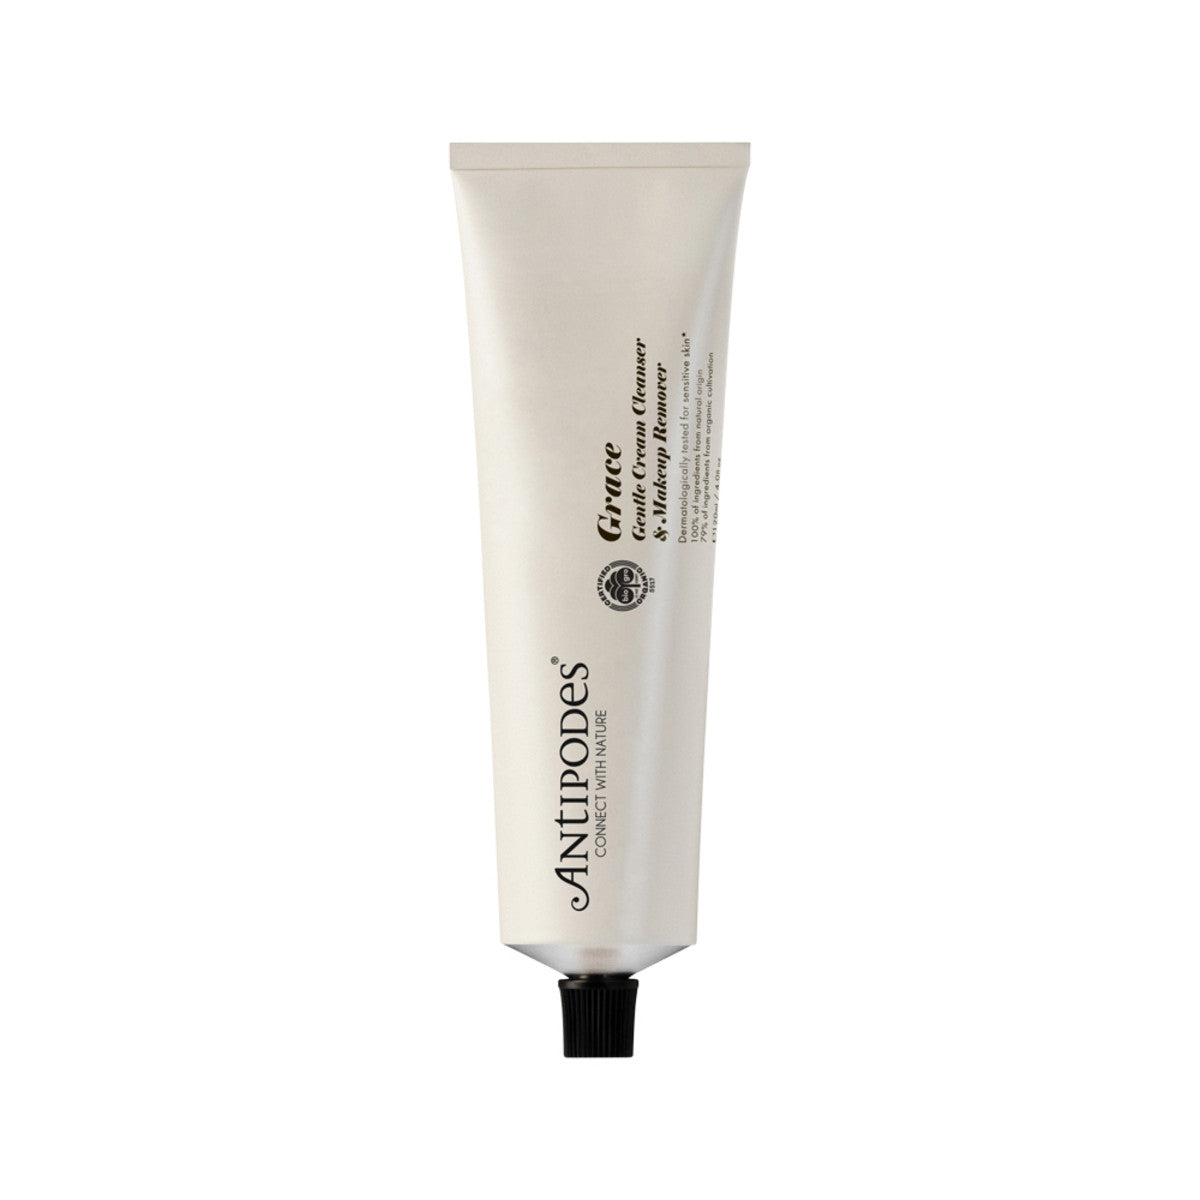 Antipodes - Cream Cleanser & Makeup Remover Grace